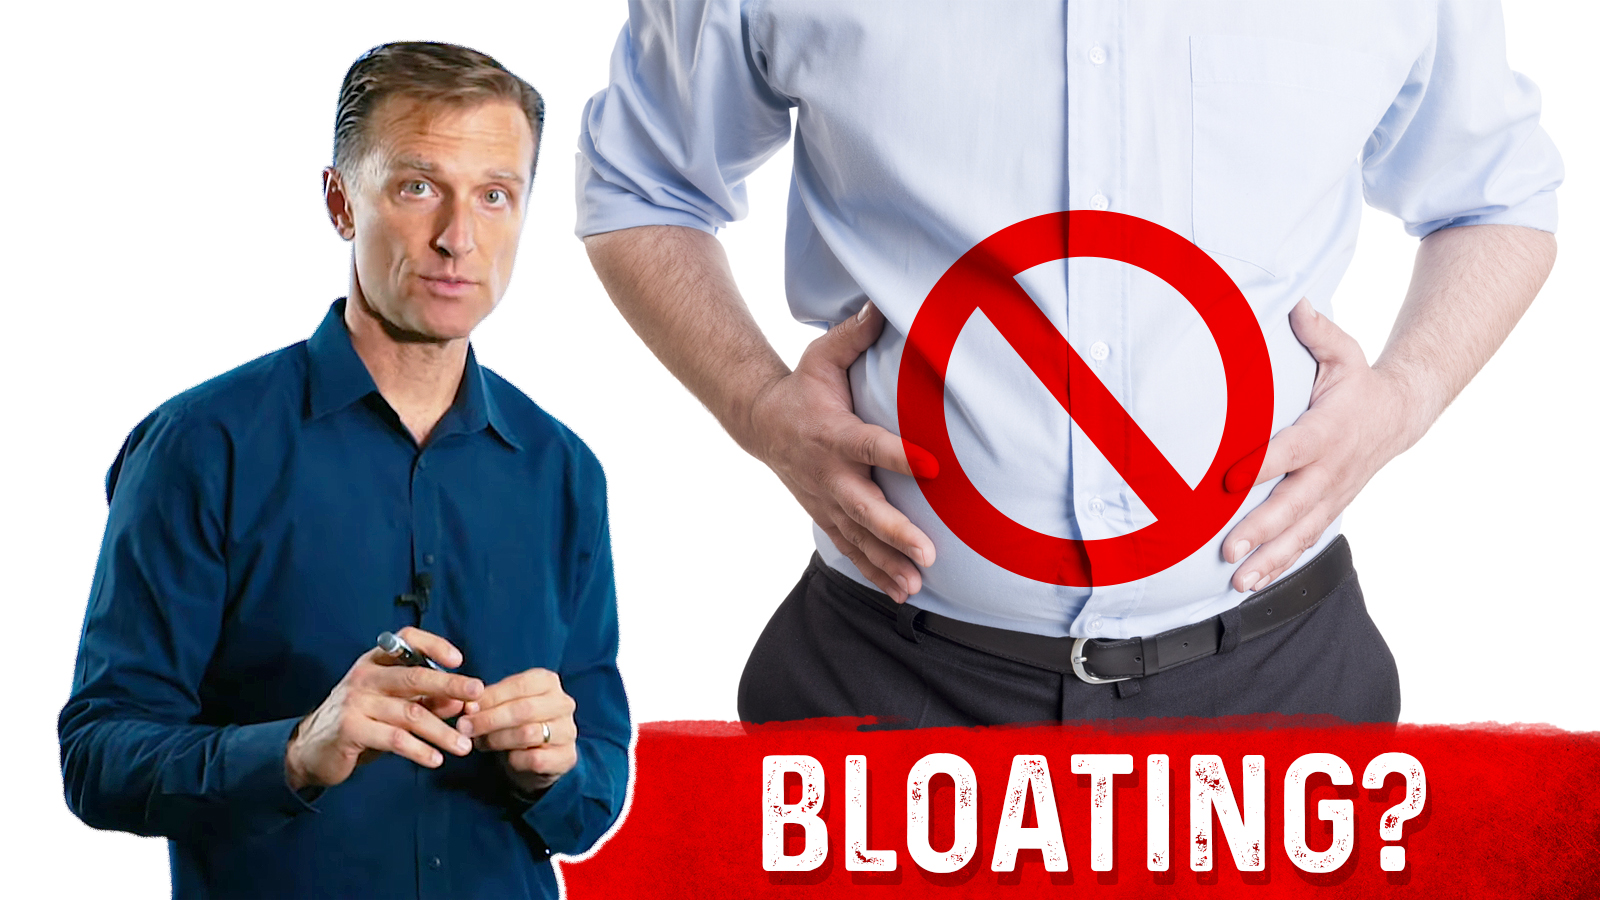 How To Get Rid Of Bloating And Abdominal Distention Dr Berg